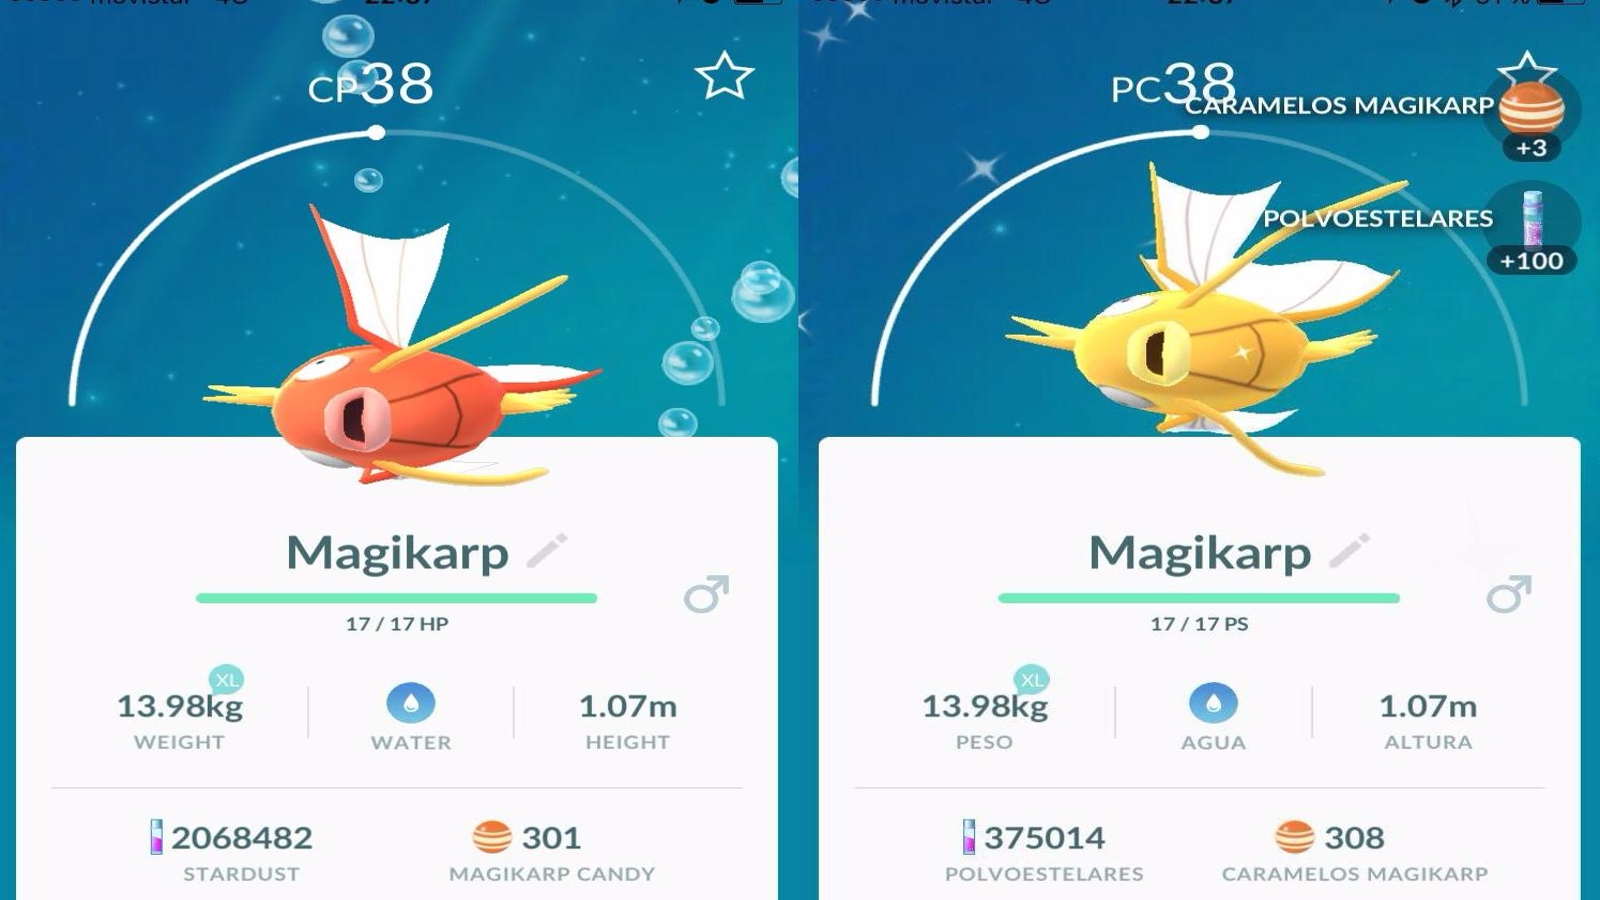 Pokémon Go' Gender Differences Update: Female Pikachu Are Appearing In The  Wild